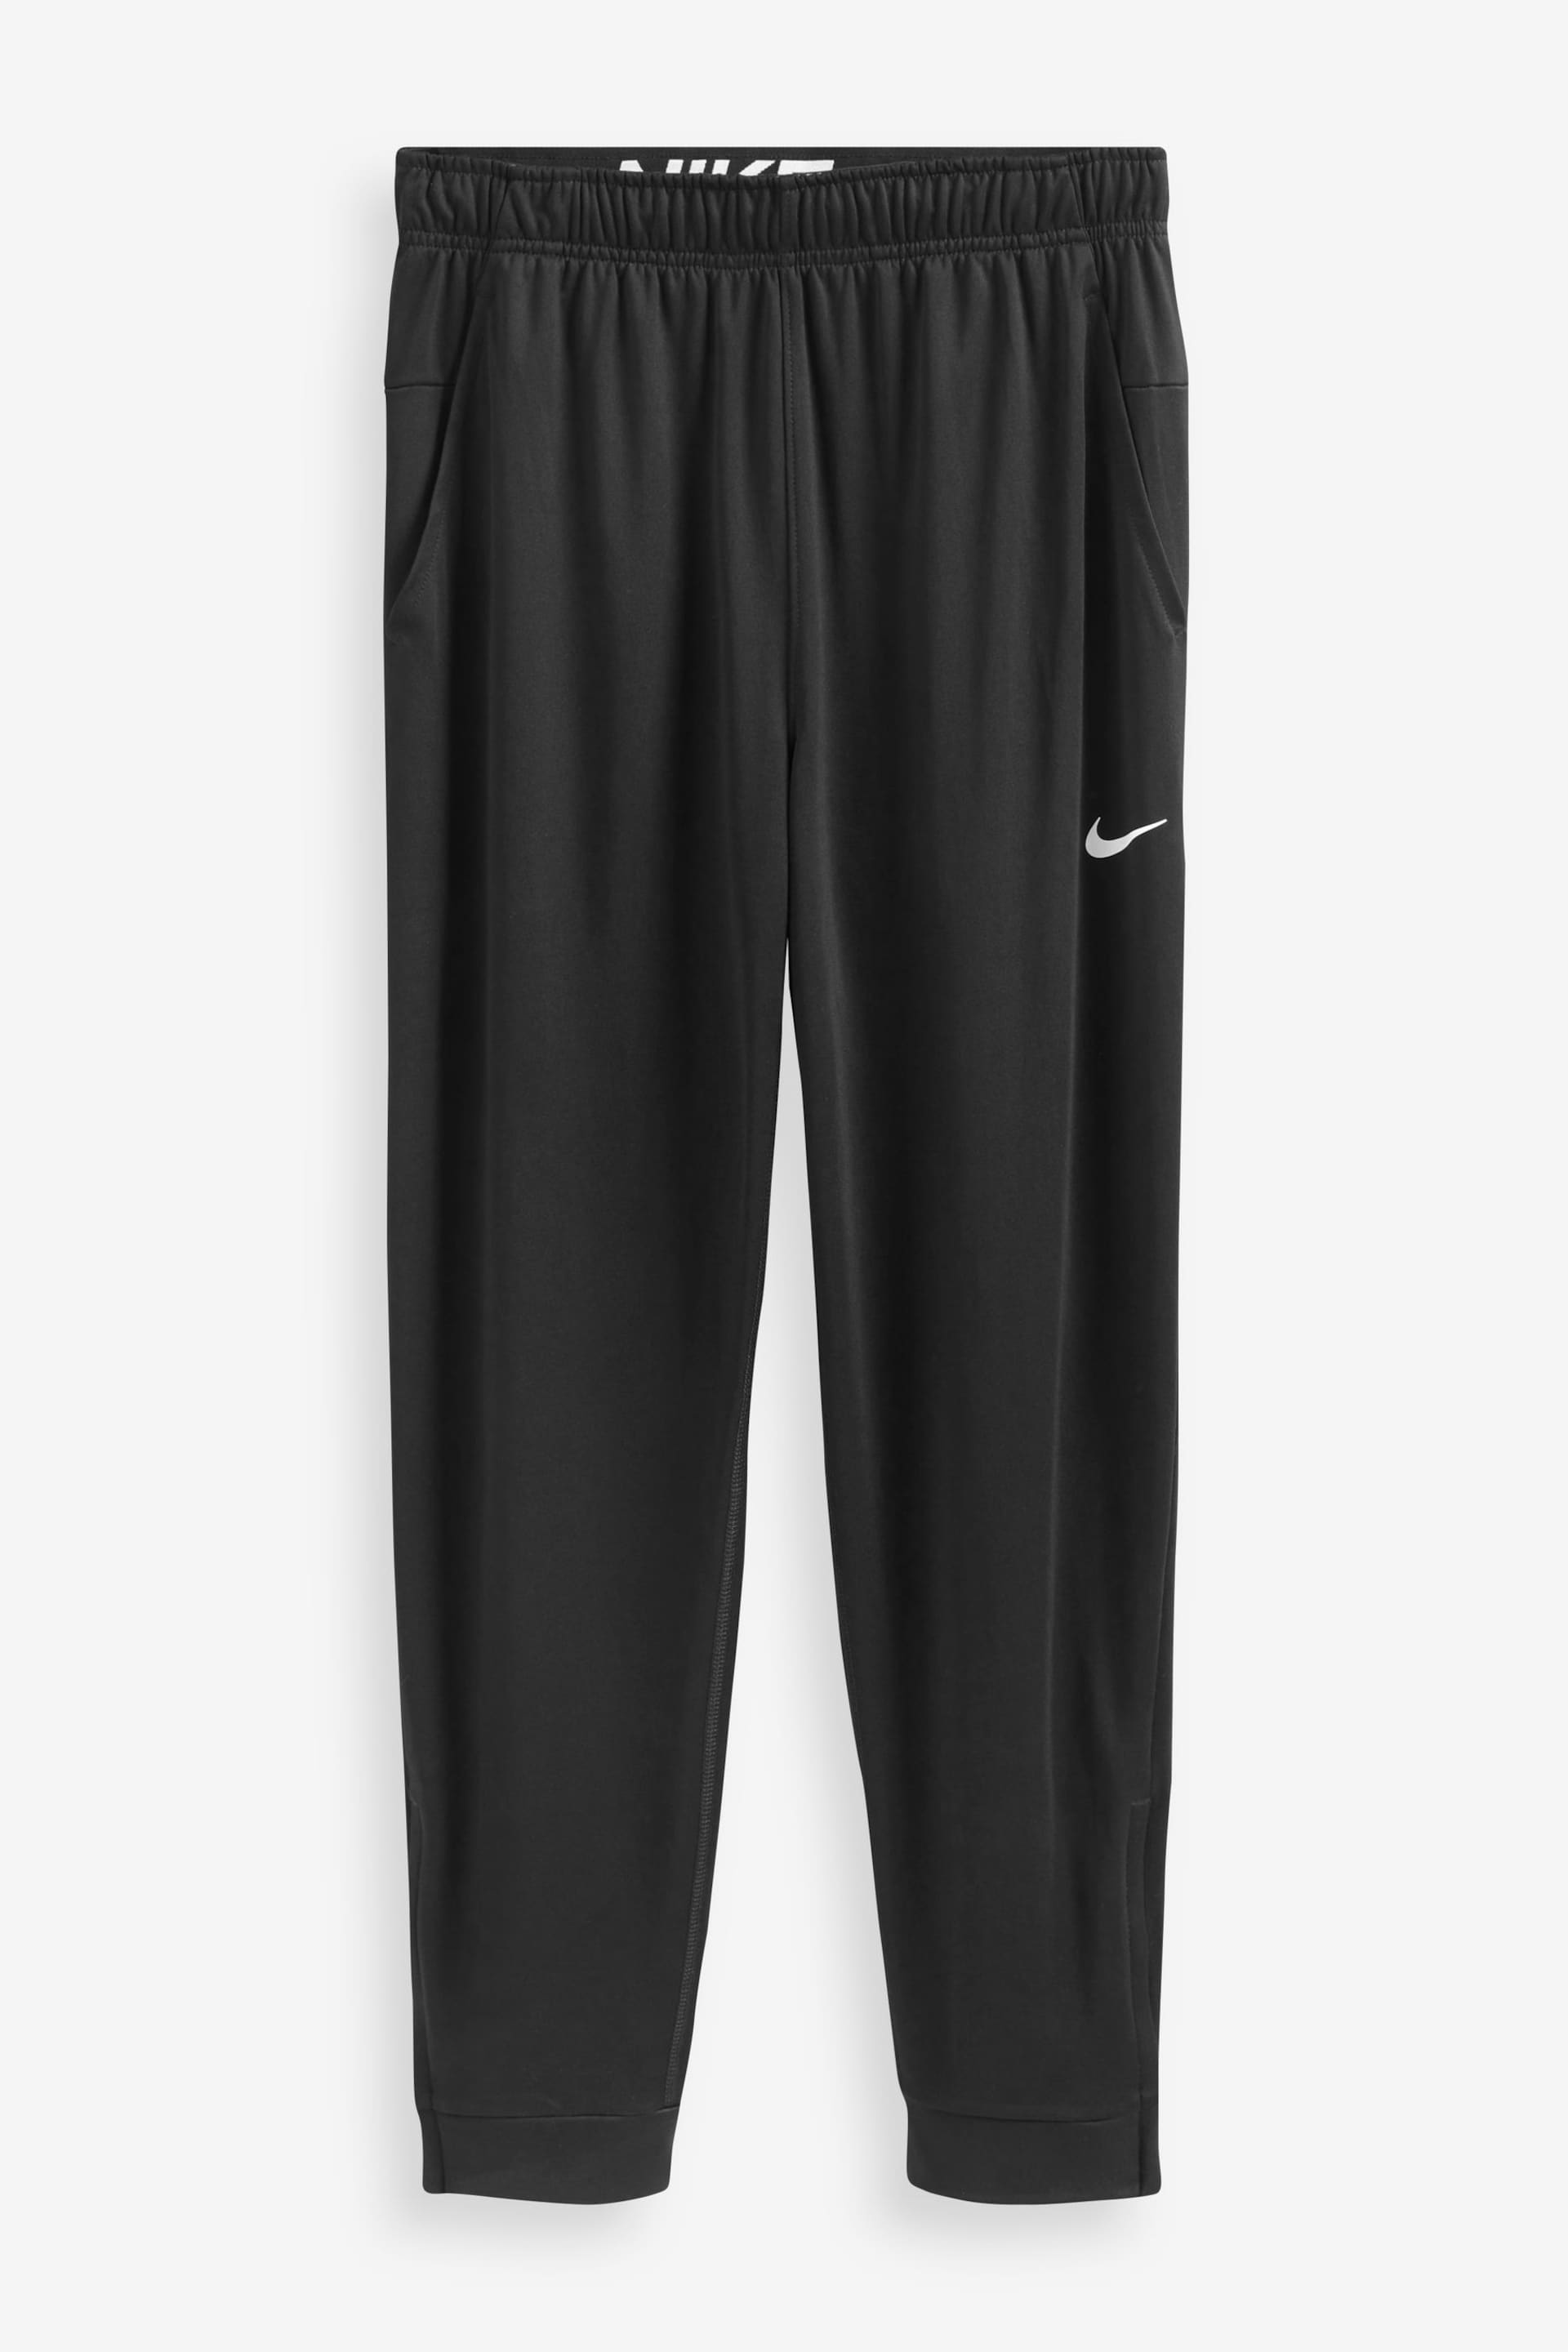 Nike Black Dri-FIT Totality Tapered Training Joggers - Image 7 of 7